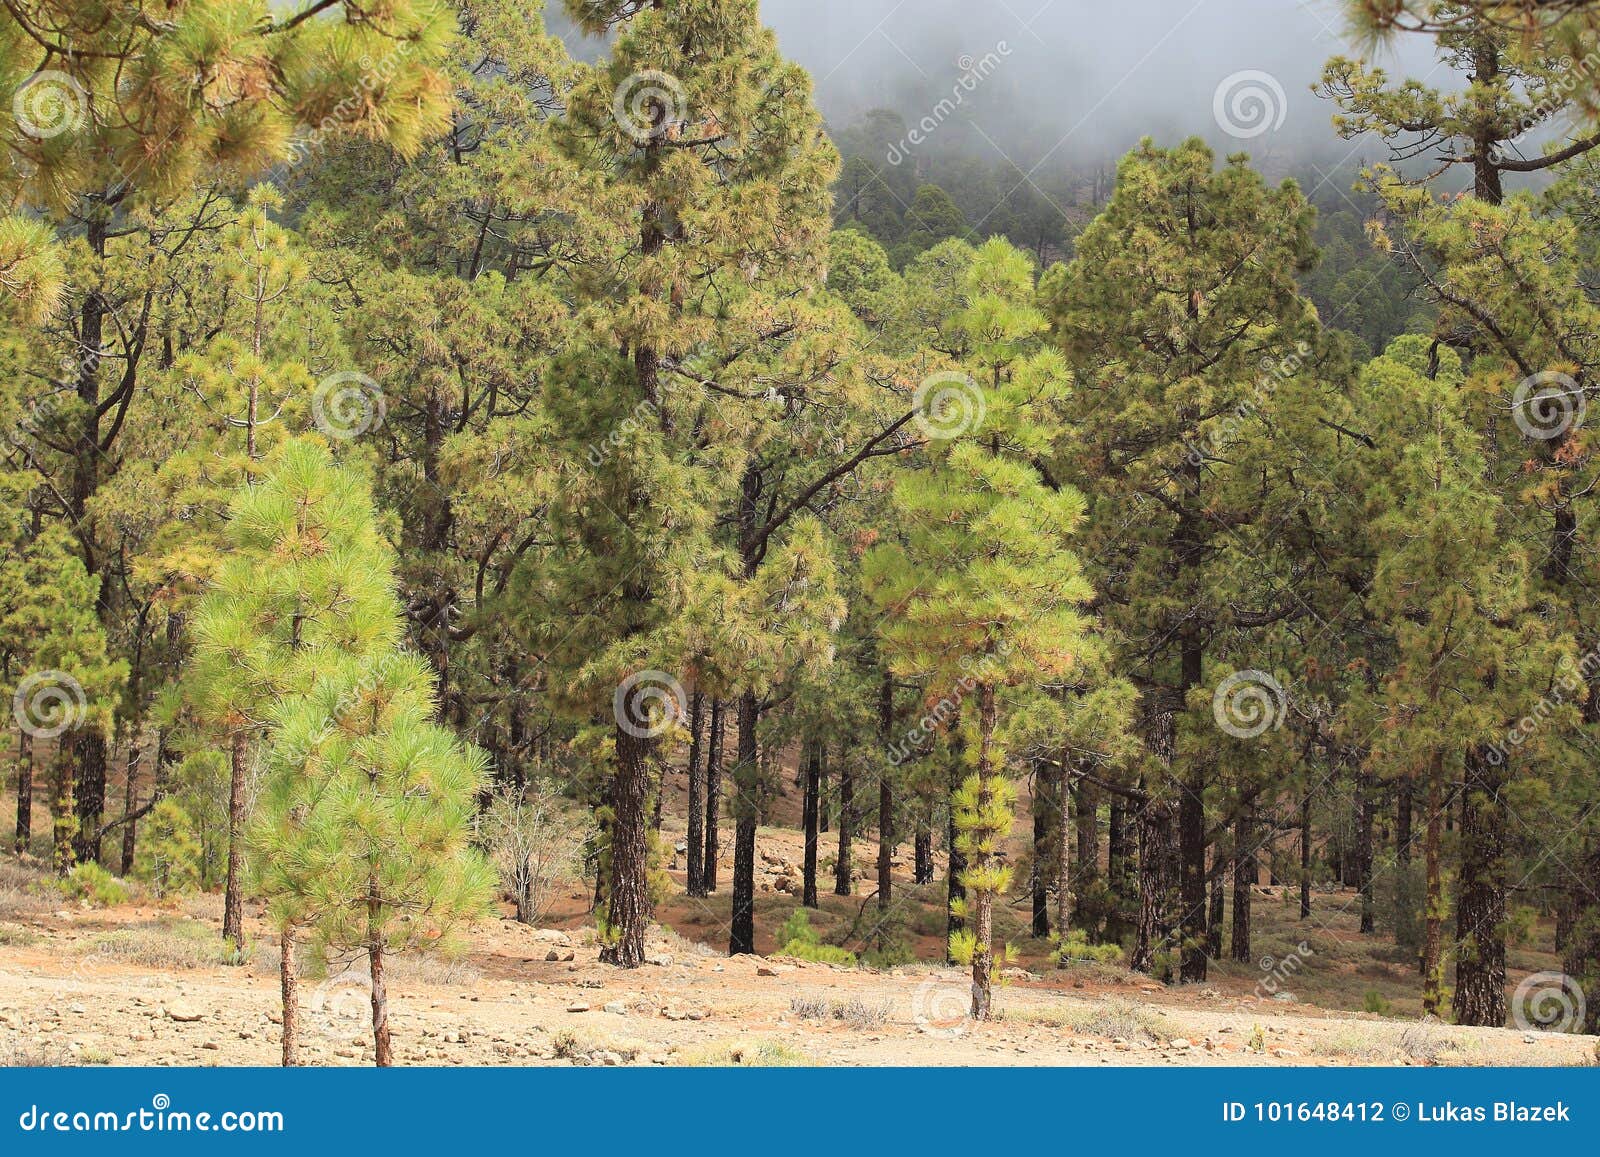 canarian pine tree forest